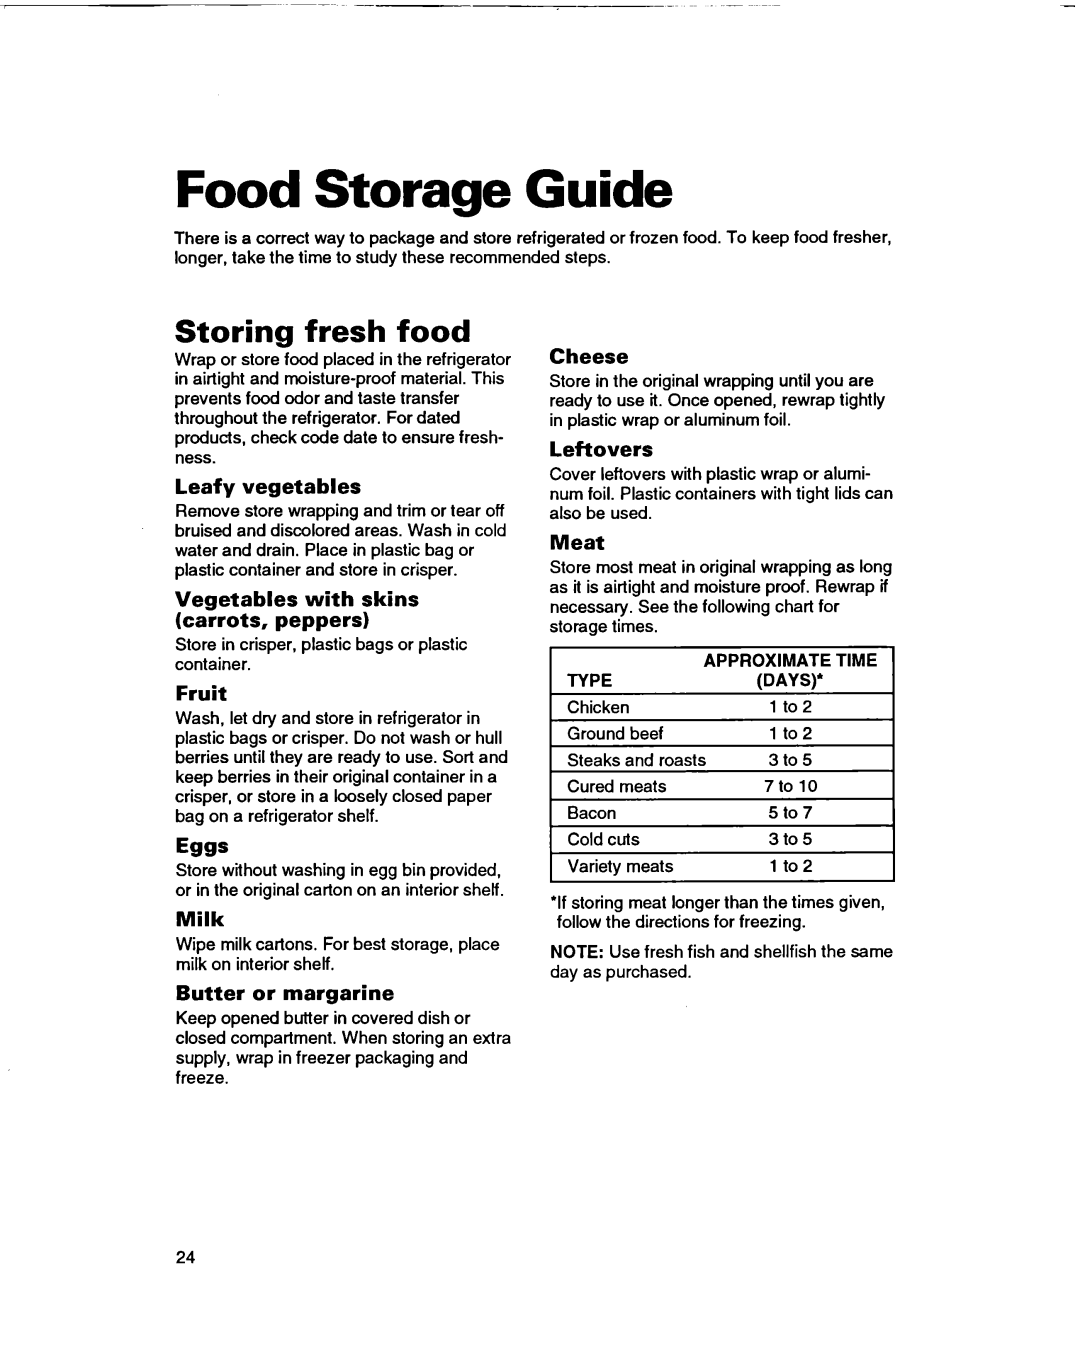 Whirlpool ED22DF Food Storage Guide, Storing fresh food, Leafy vegetables, Vegetables with skins carrots, peppers, Fruit 